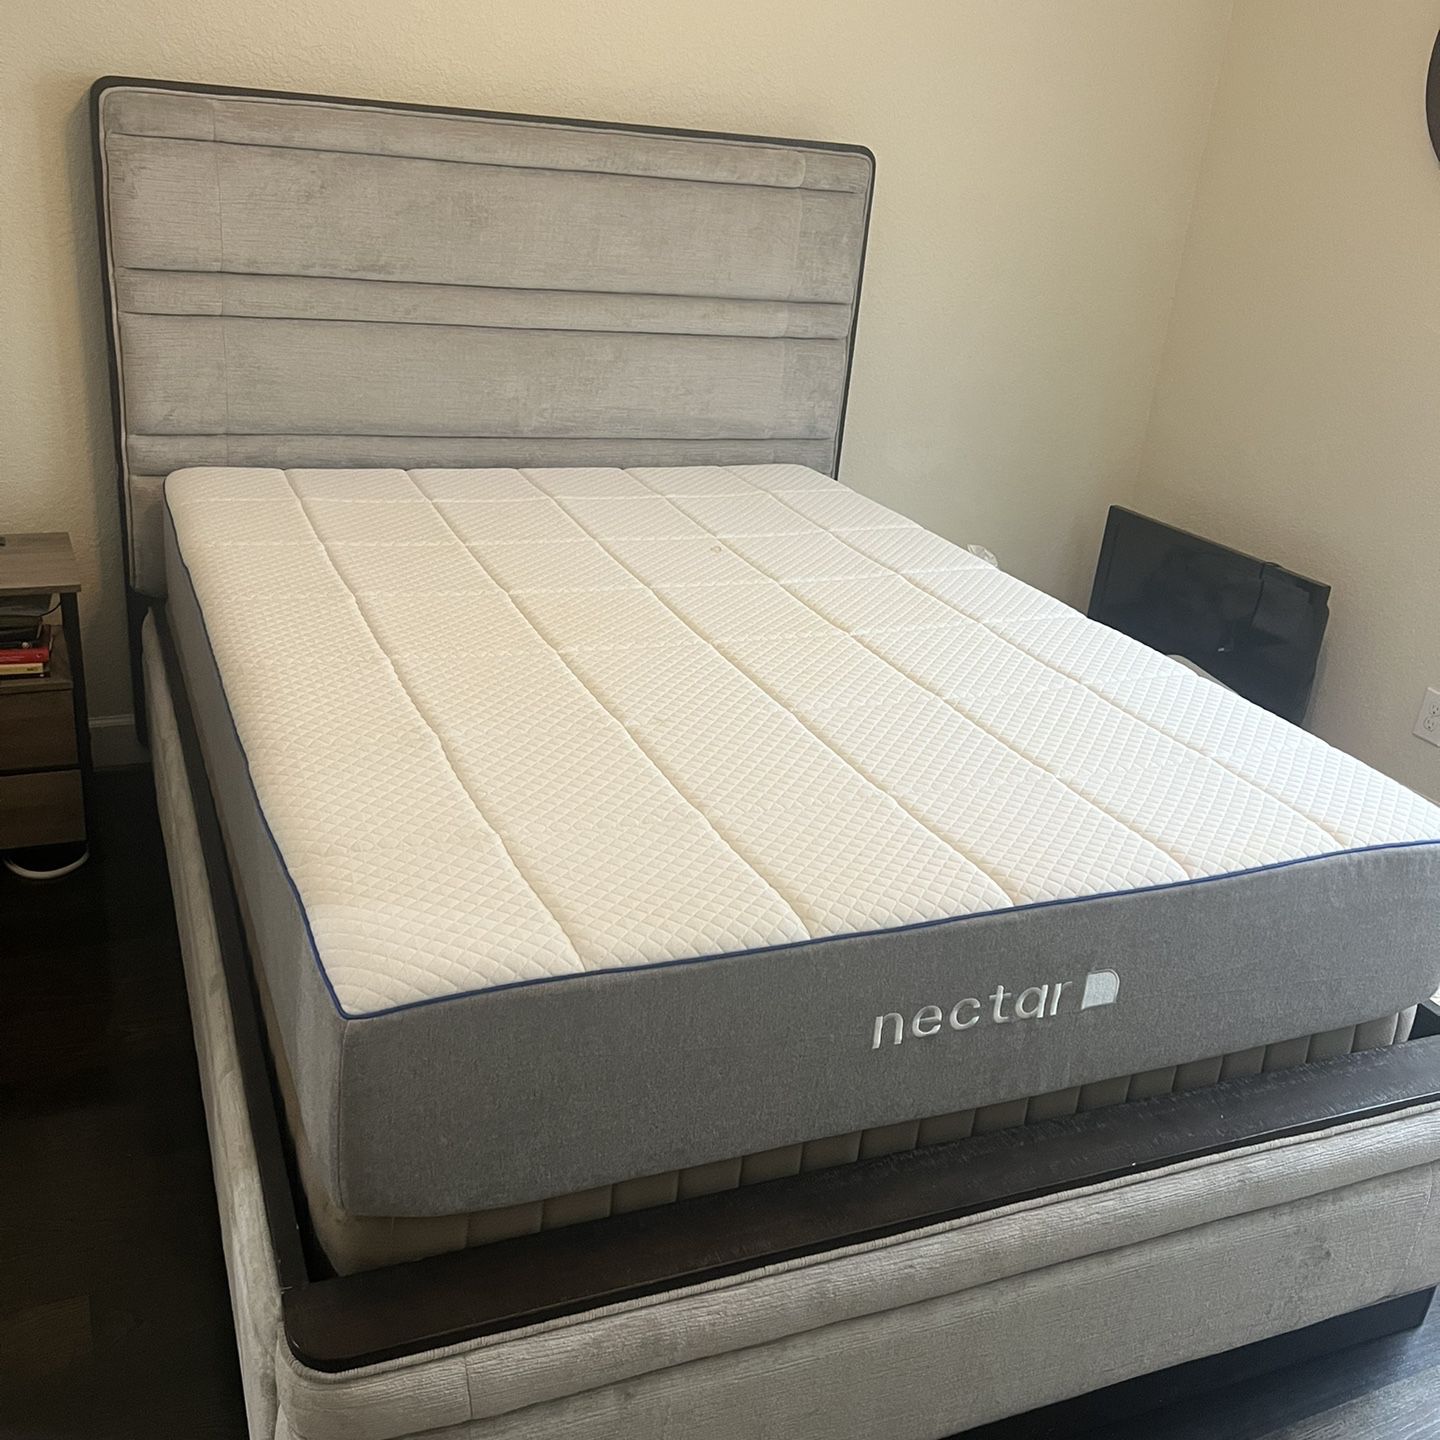 Cute! Ashley furniture Queen Bed With Nectar Mattress